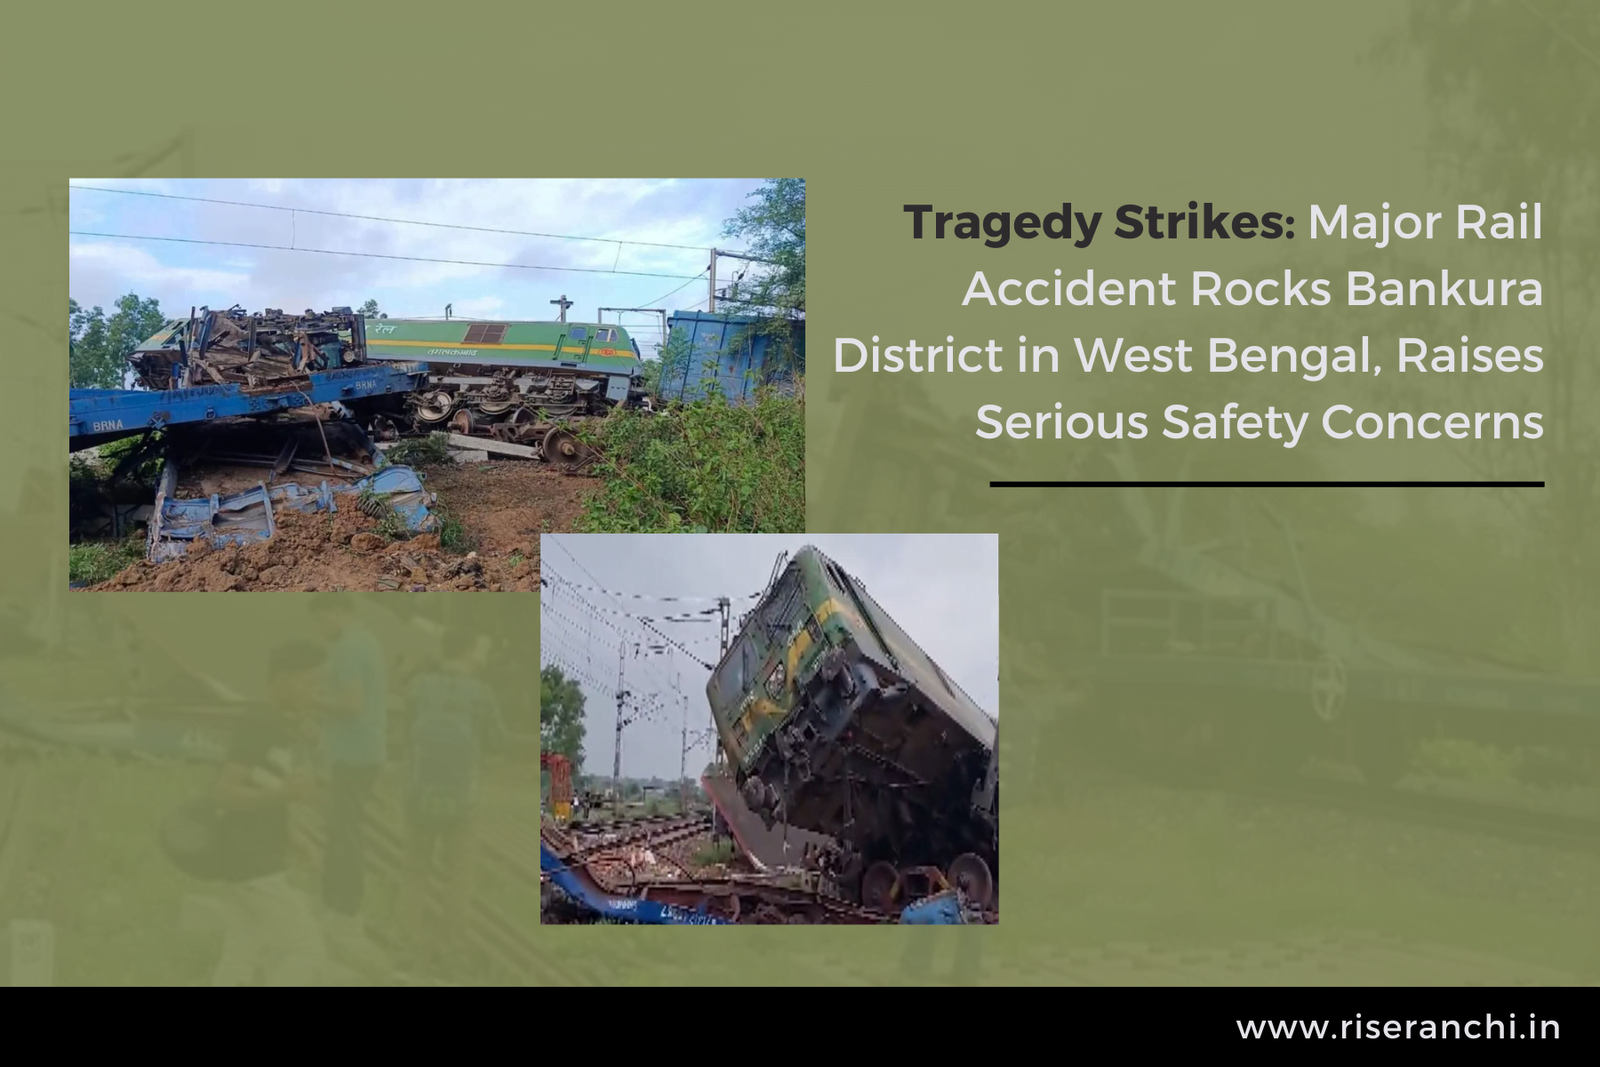 Tragedy Strikes: Major Rail Accident Rocks Bankura District in West Bengal, Raises Serious Safety Concerns